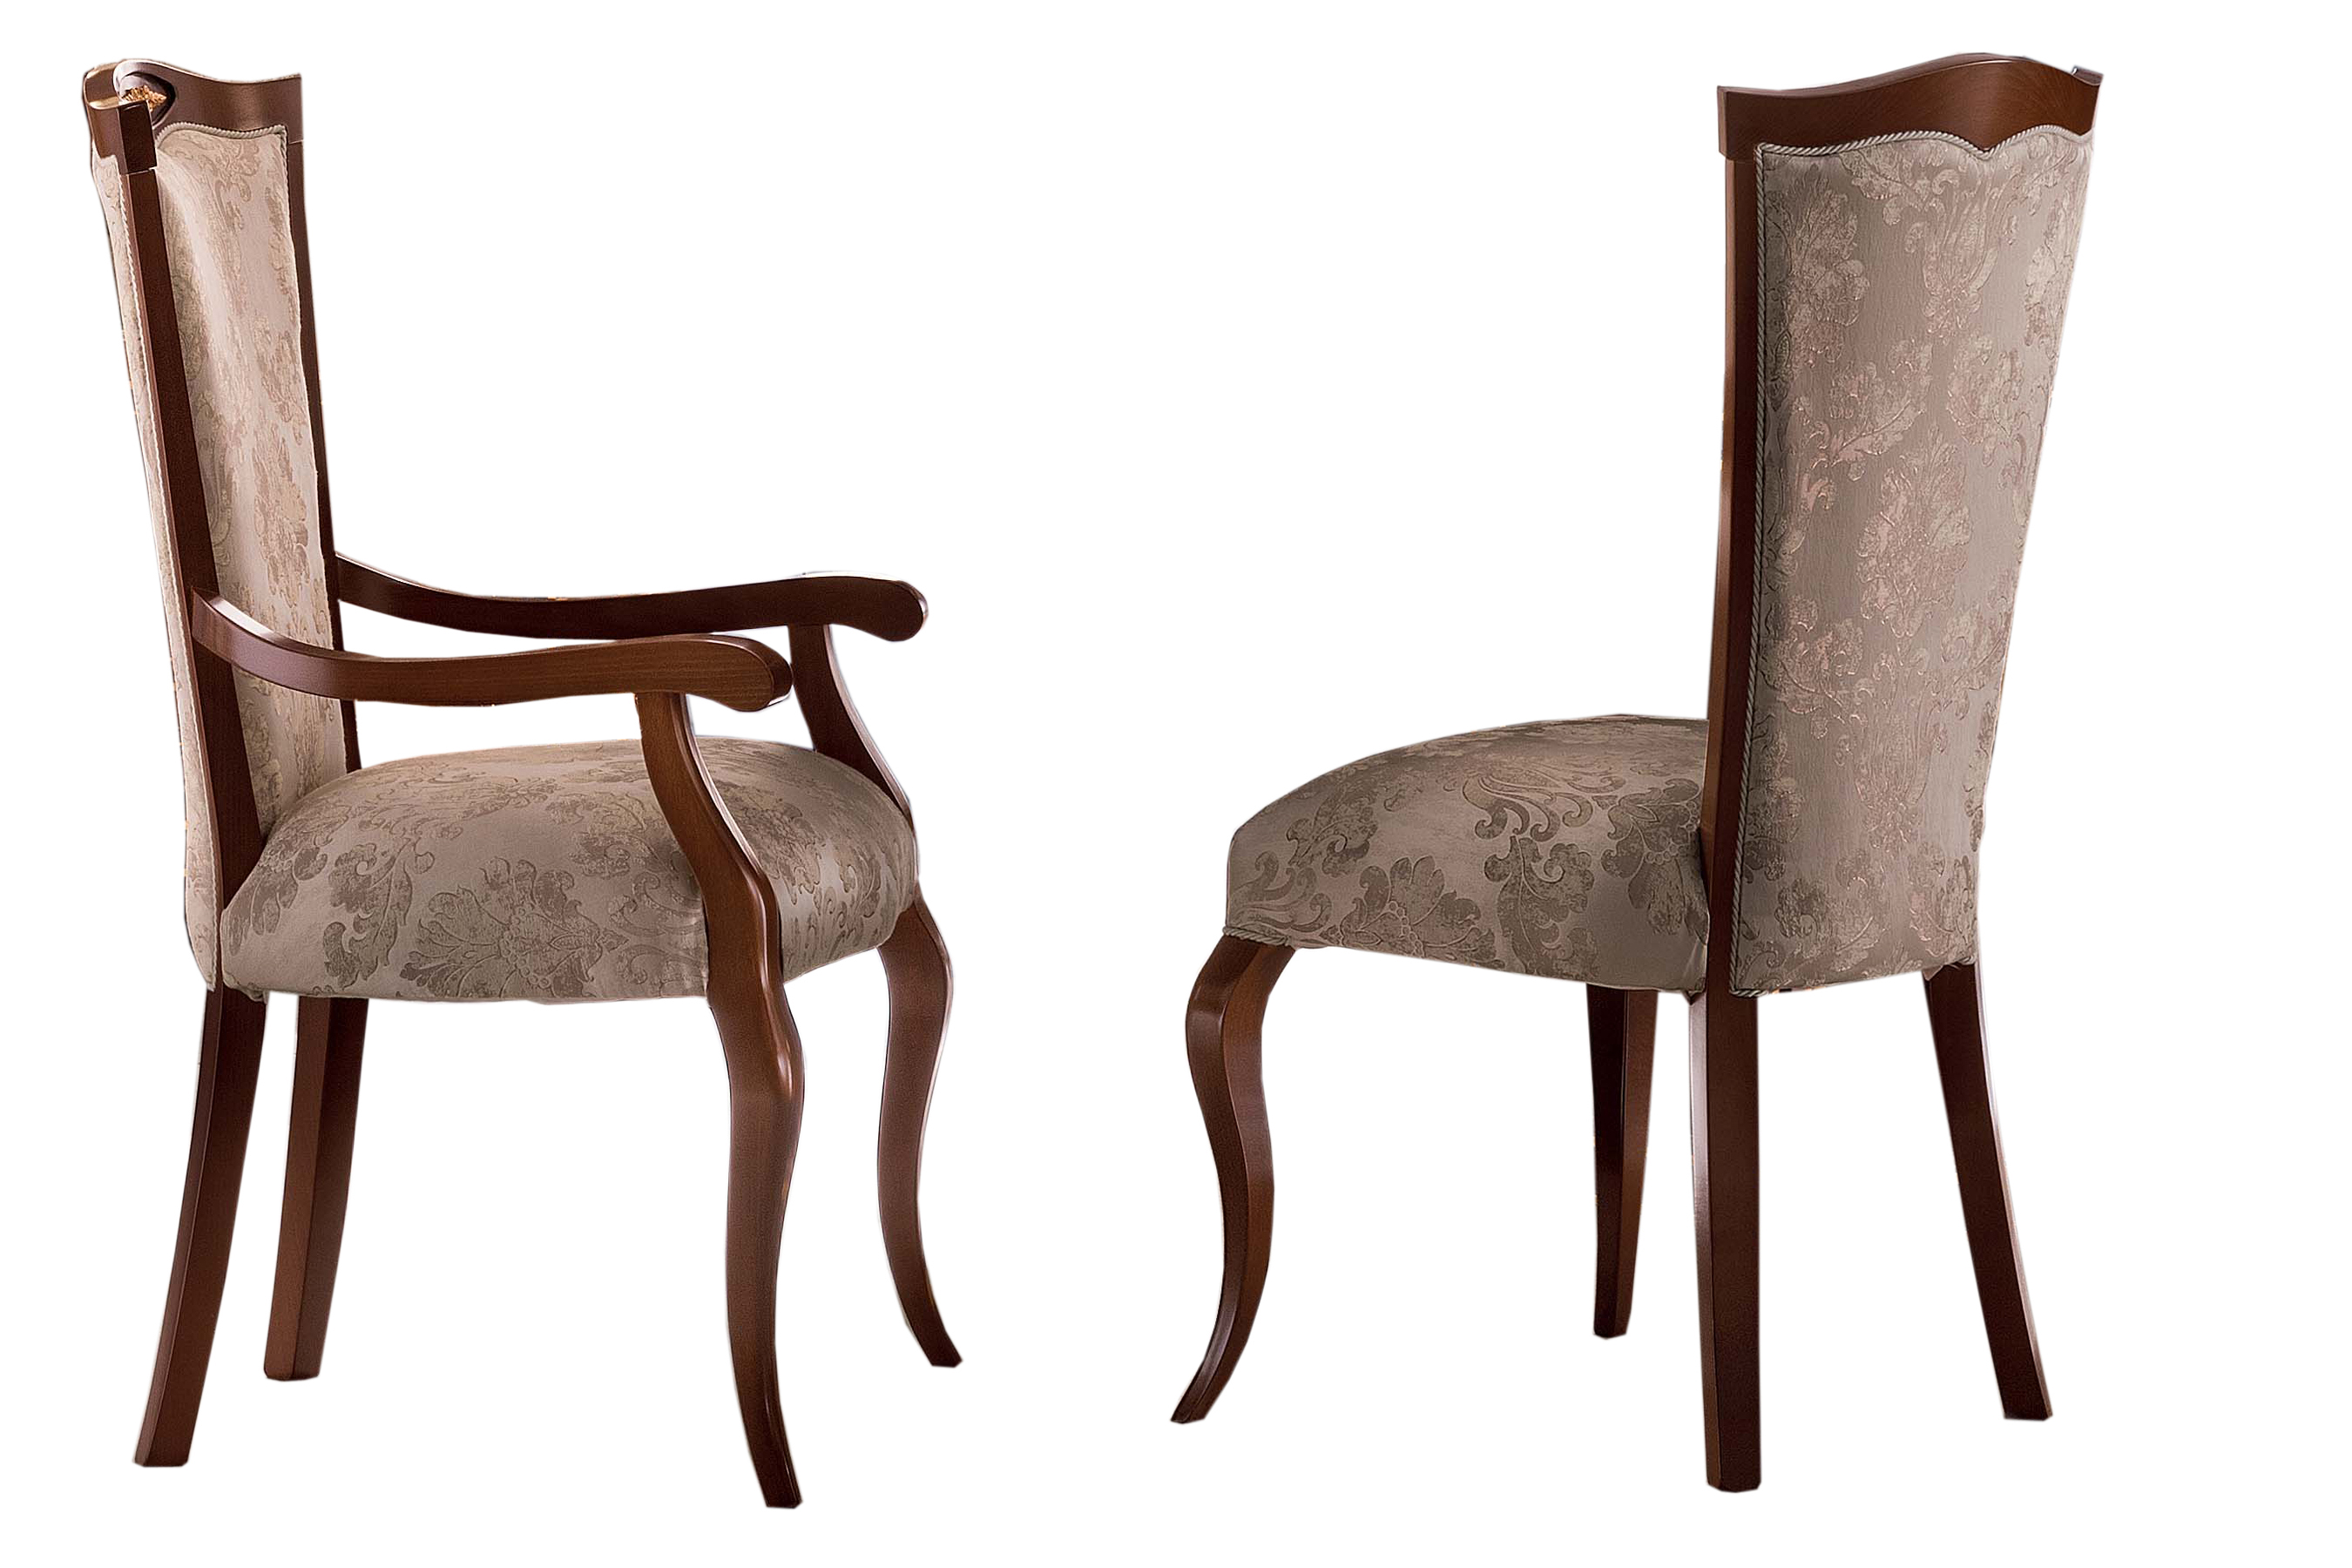 Brands Arredoclassic Bedroom, Italy Modigliani Chair by Arredoclassic